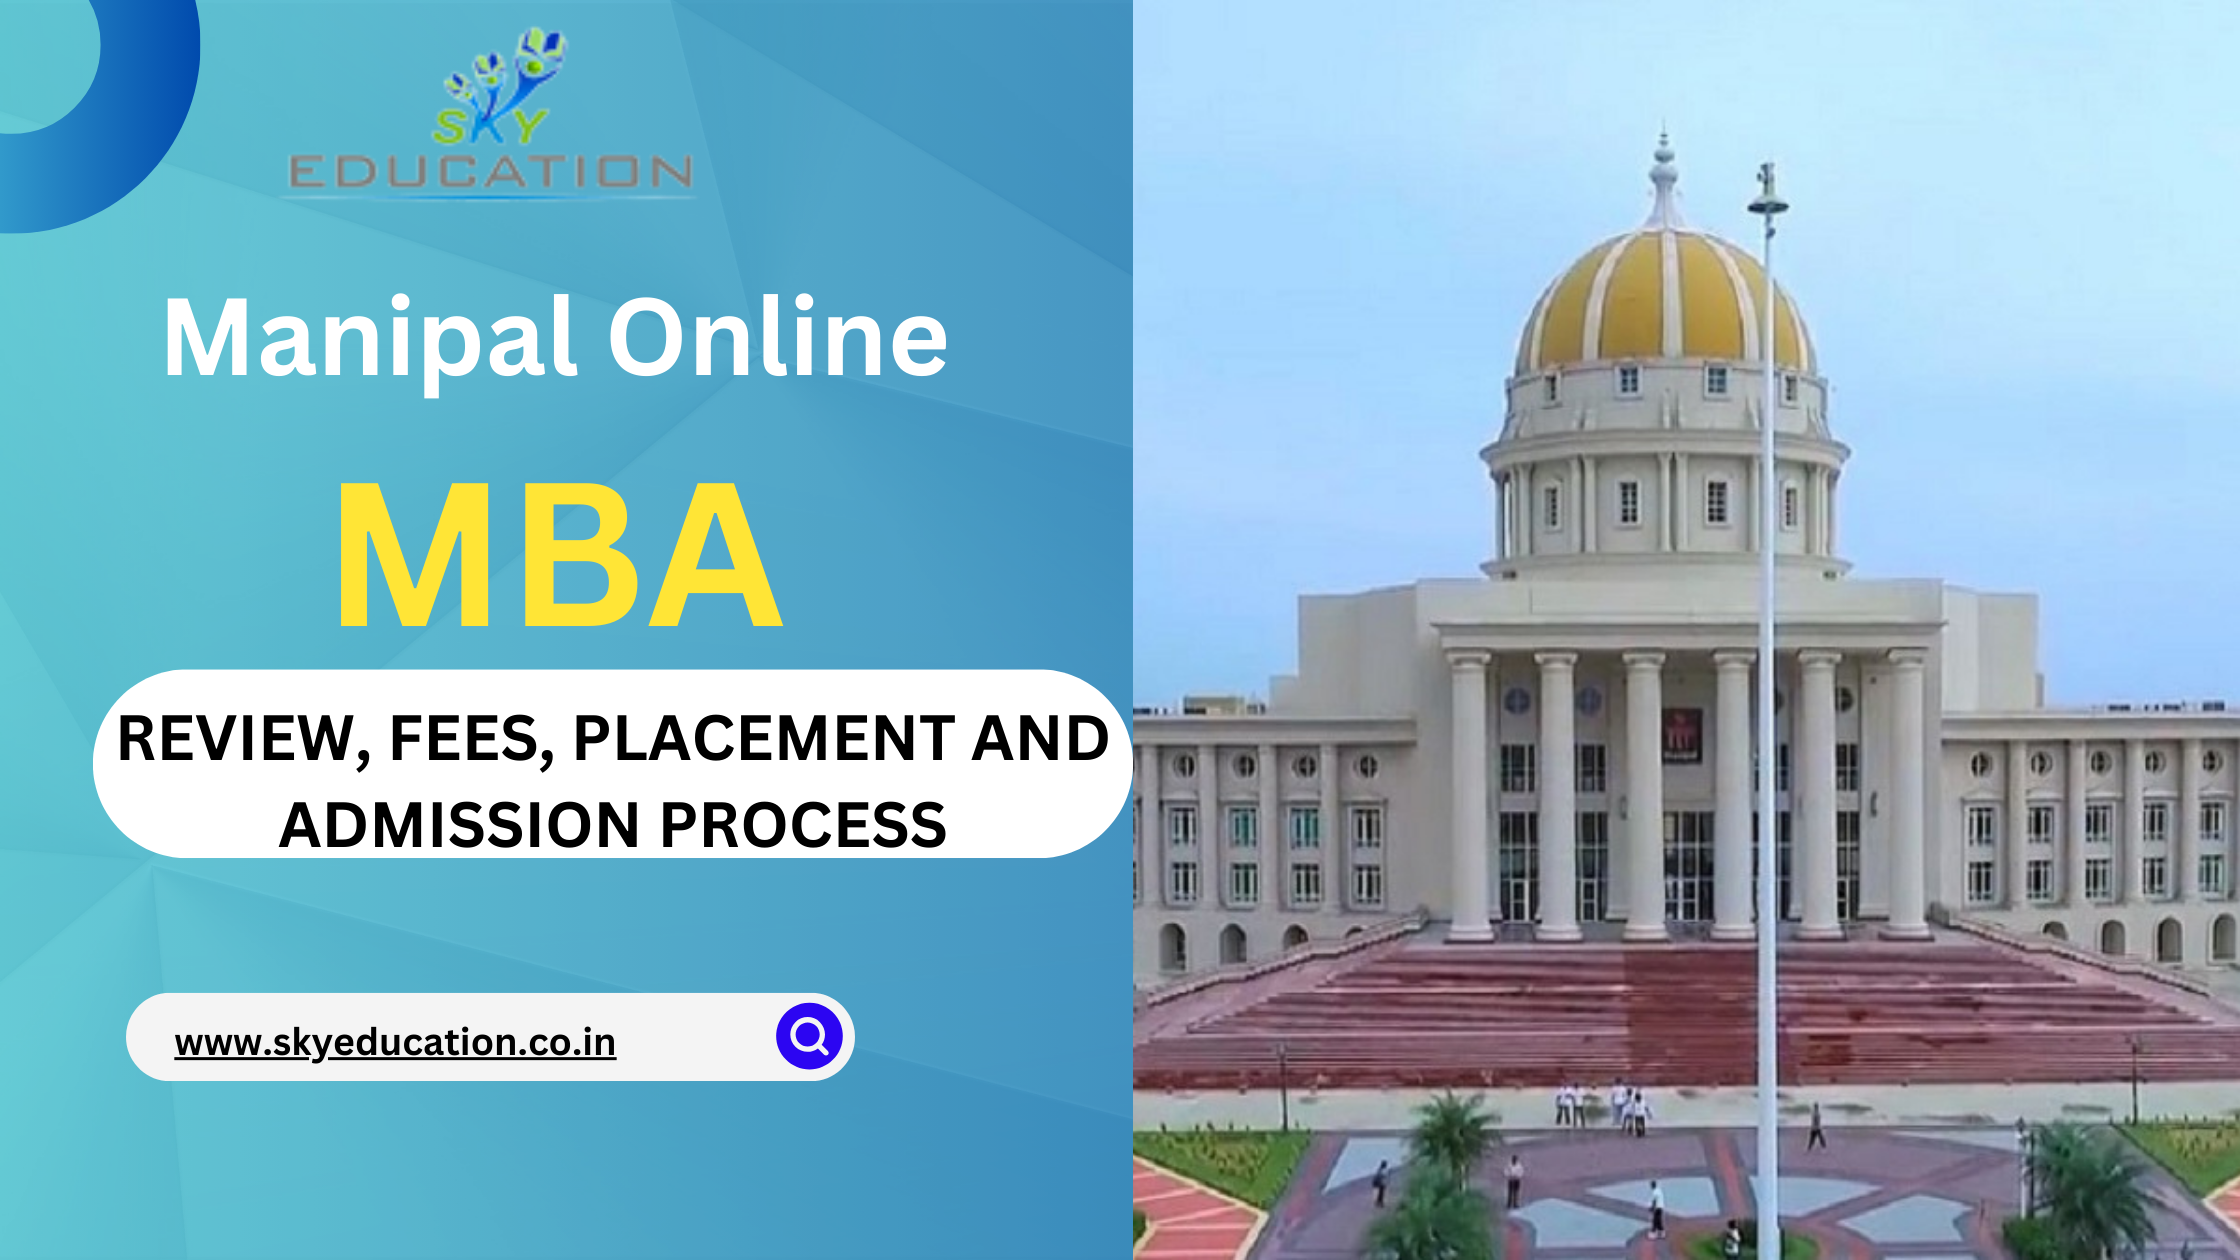 Manipal University, Jaipur : Manipal Online MBA Review